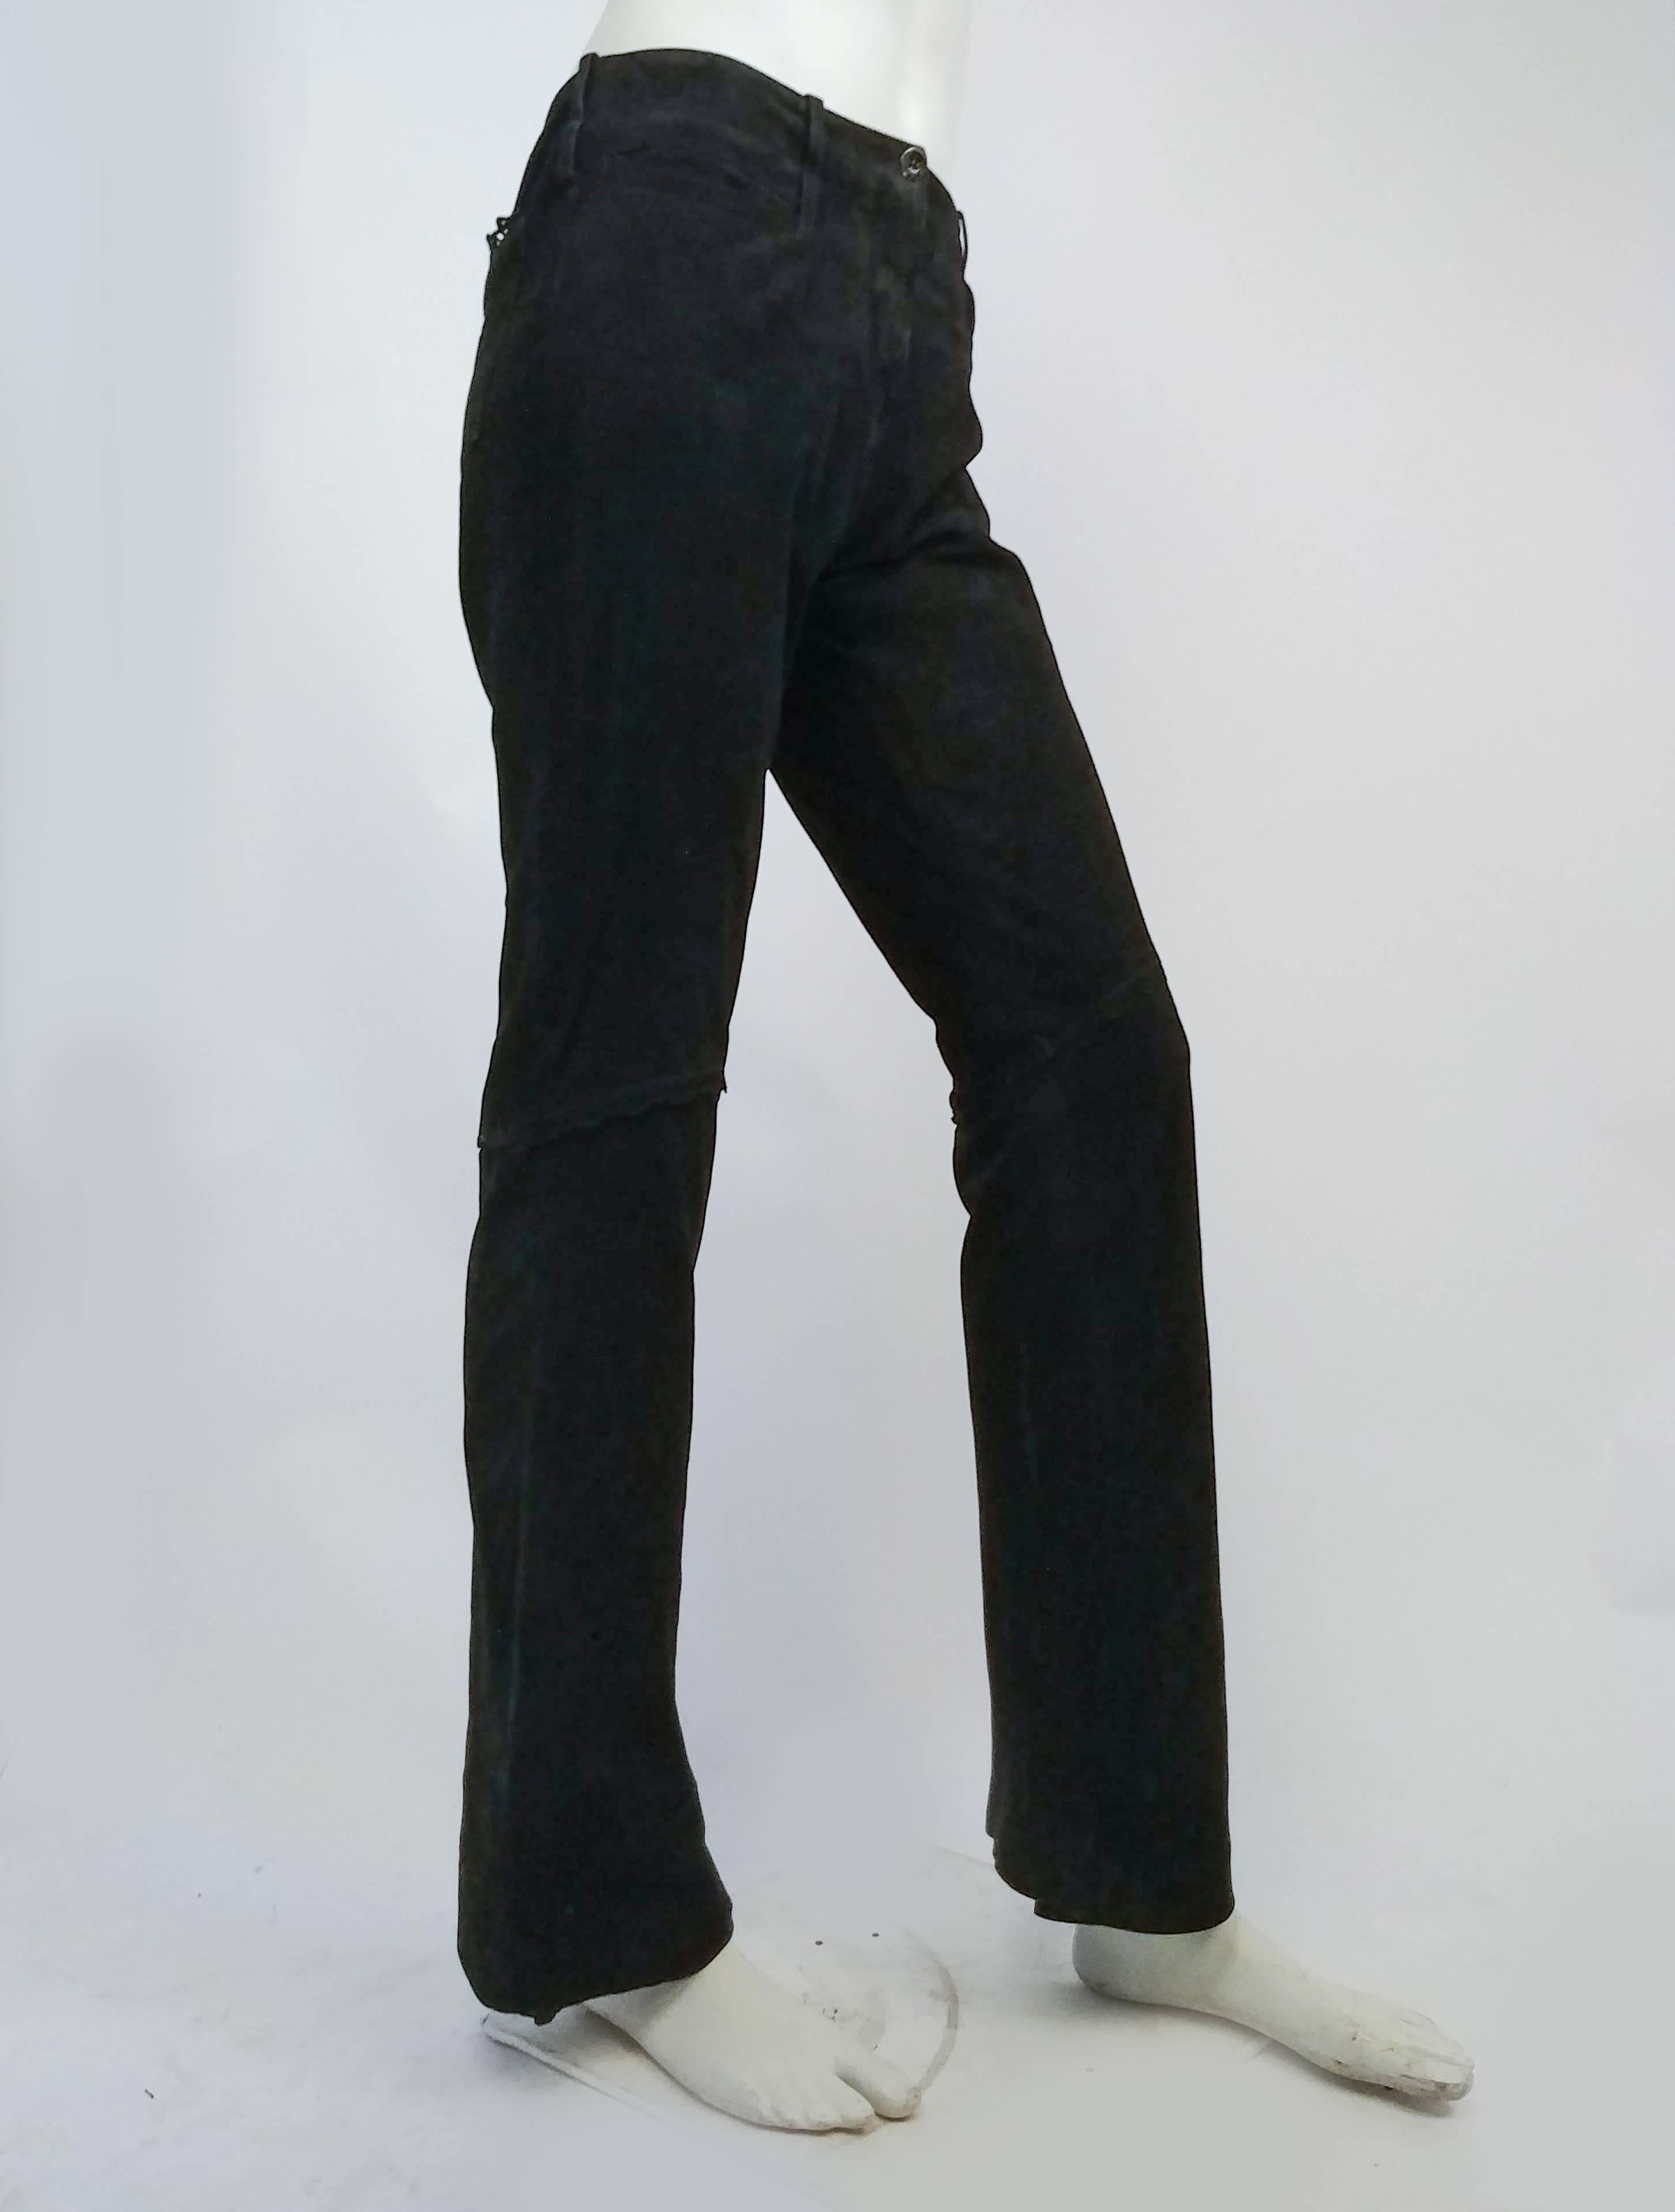 Christian Lacroix Black Suede Pants. Black suede leather pants with deceptive perforations and pseudo-lace detail at back pockets and at knees. Bootleg cut.